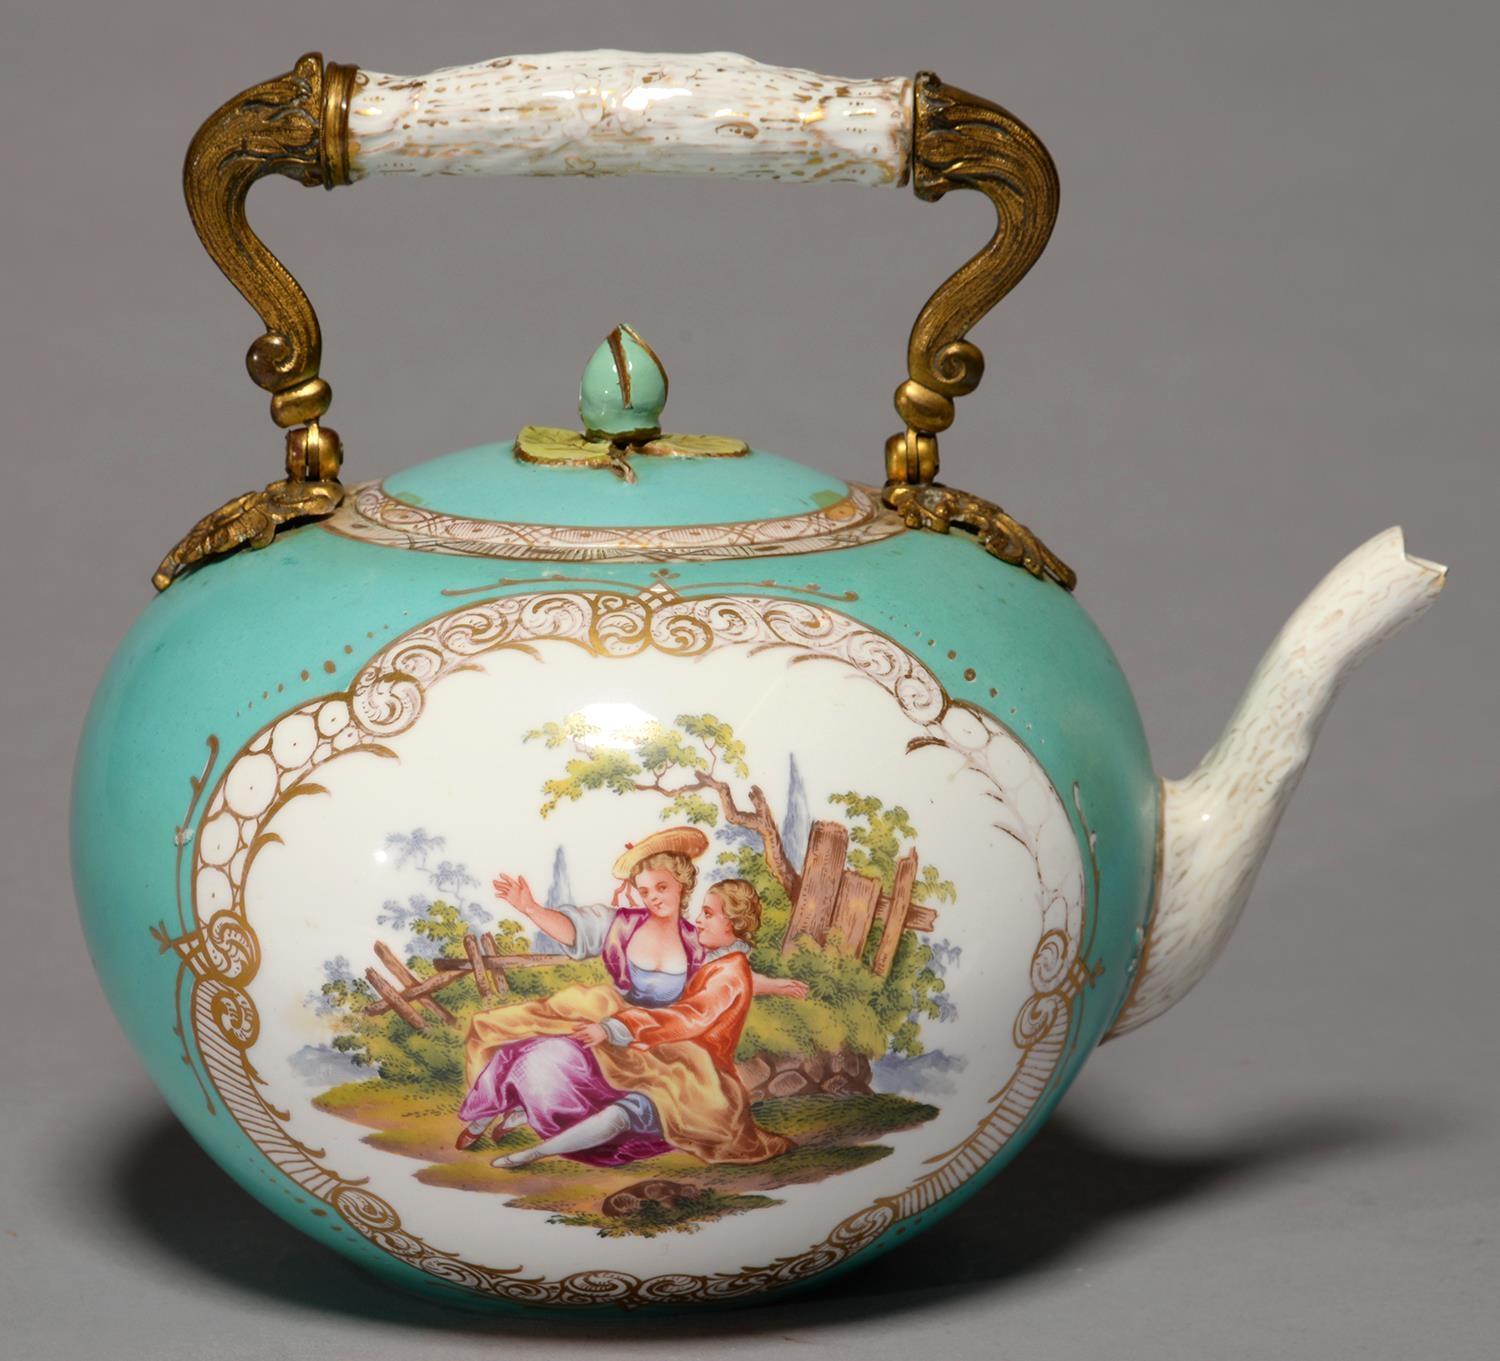 A MEISSEN TURQUOISE GROUND GLOBULAR TEA KETTLE AND COVER, LATE 19TH C, MOUNTED WITH ORMOLU SWING - Image 2 of 2